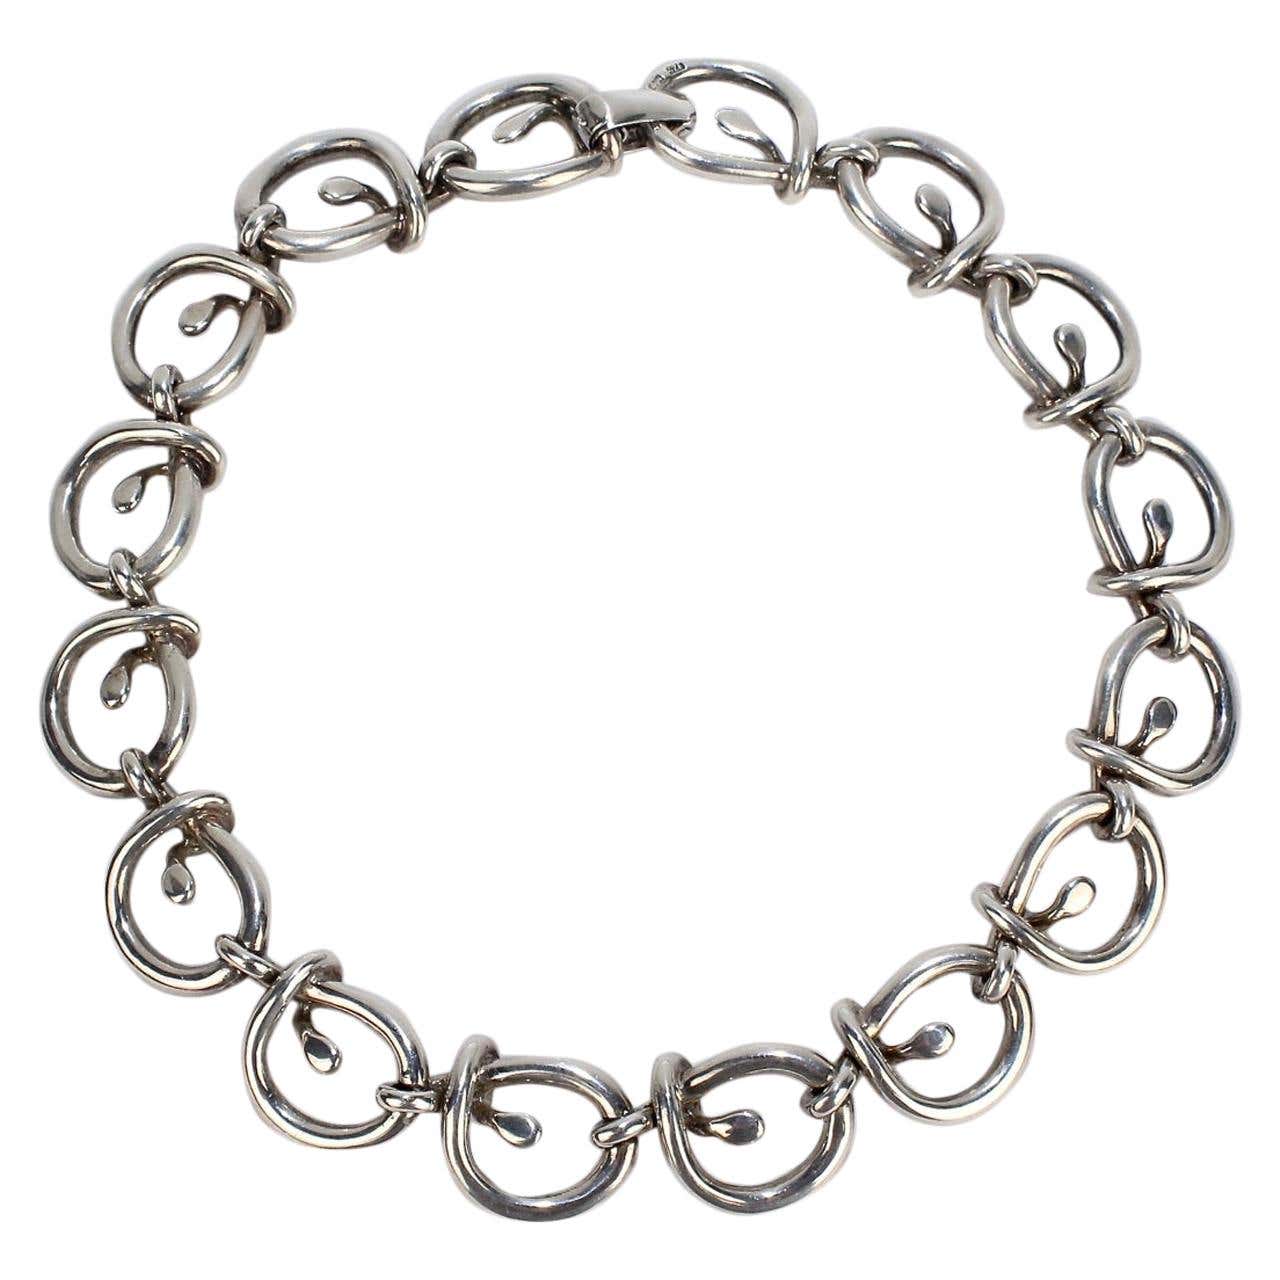 Heavy Link Vintage Mexican Sterling Silver Dog Collar Choker Necklace ...